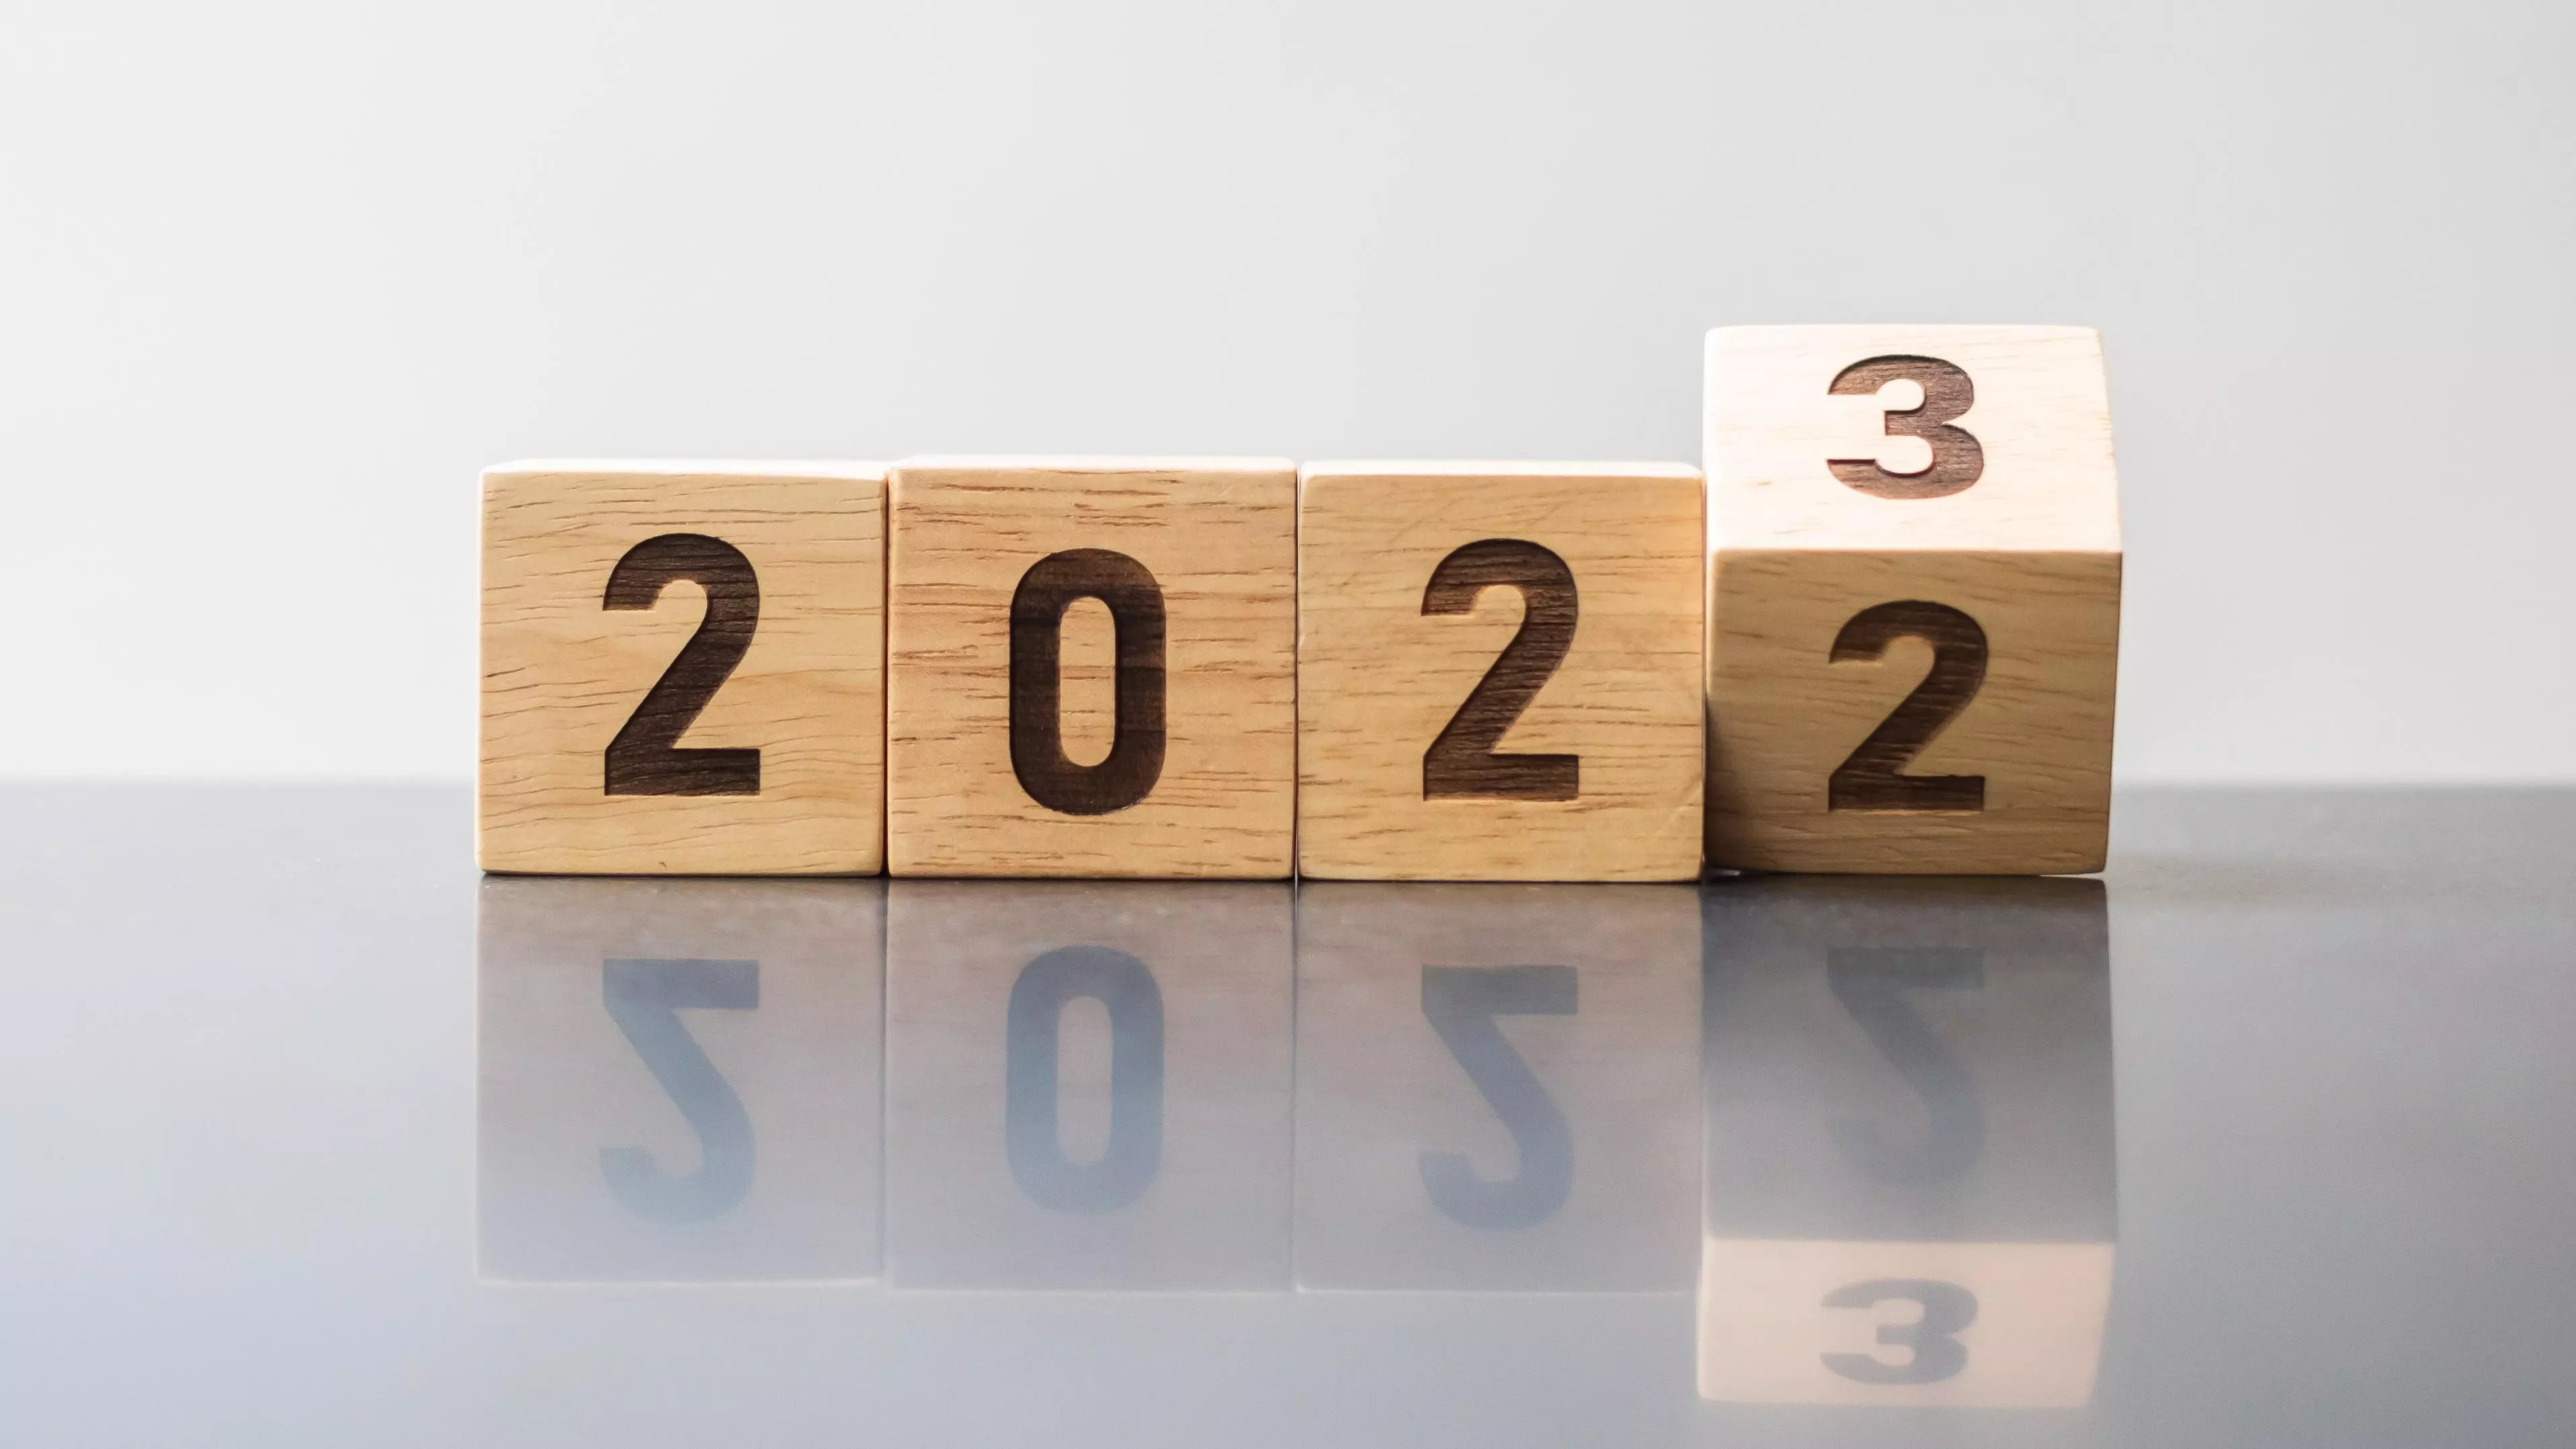 Image of wooden blocks showing 2022 with the last one turning forward to reveal a 3.